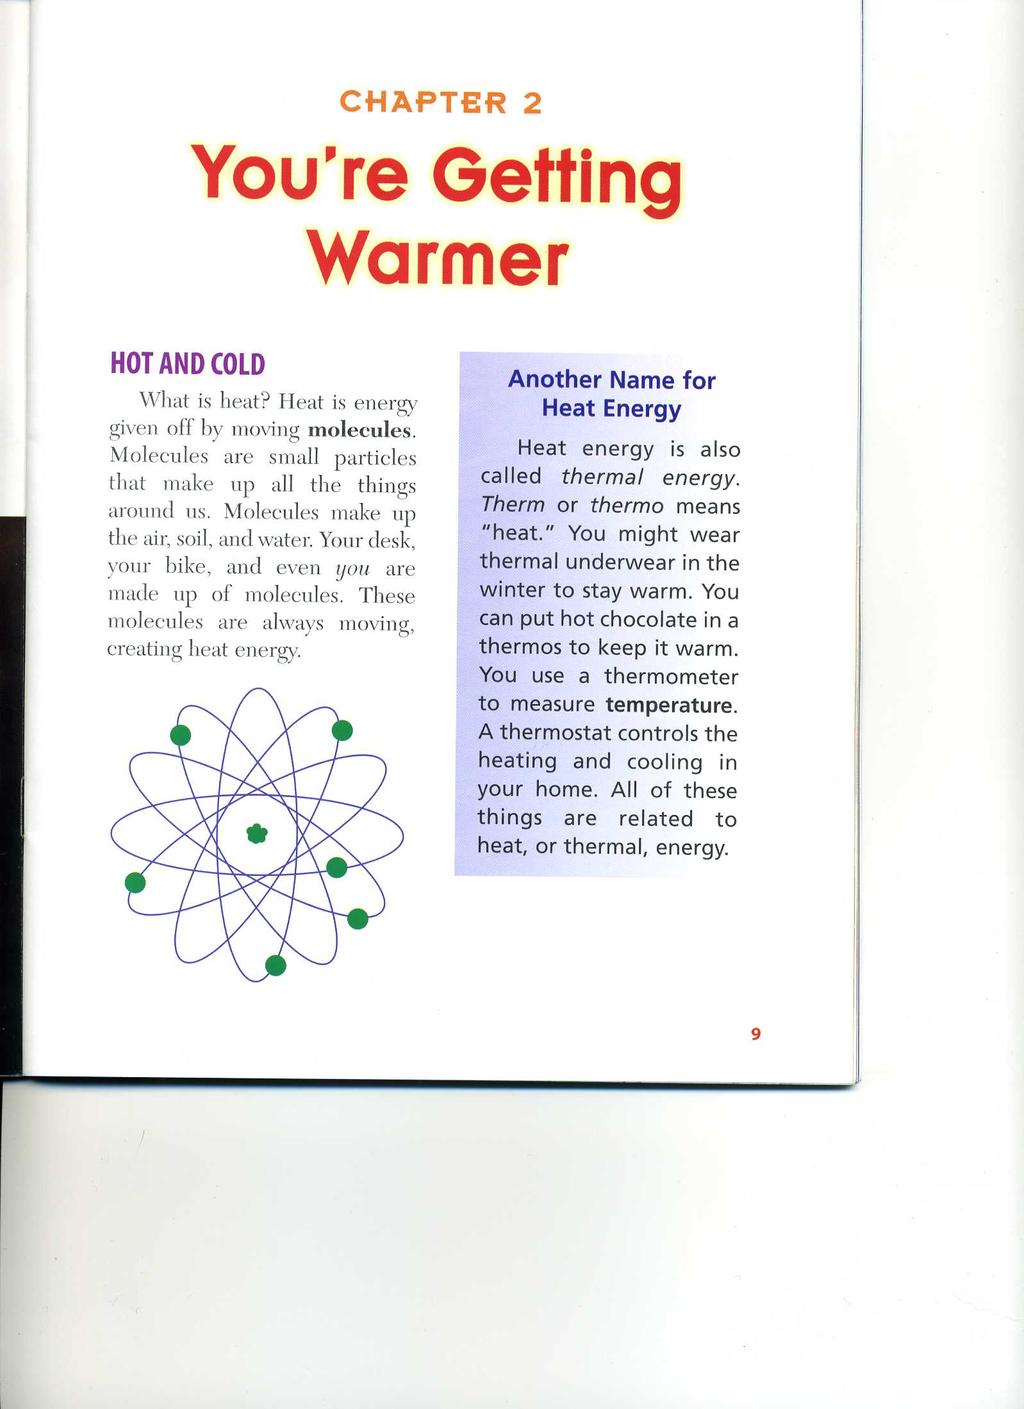 CHAPTER 2 You're Getting Warmer HOT AND COLD What is heat? Heat is energy given off by moving molecules. Molecules are small particles that make up all the things around us.